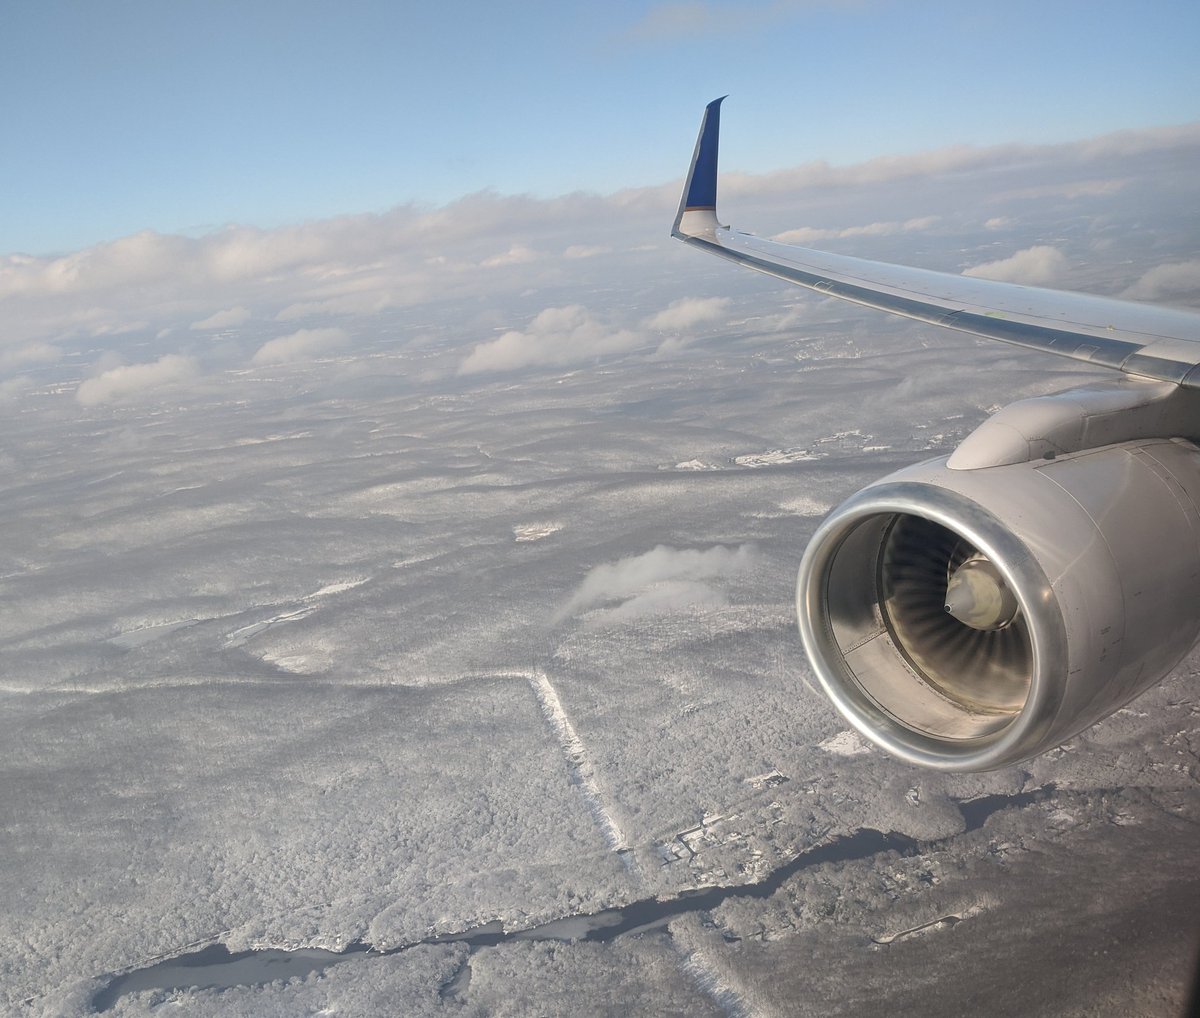 We left EWR on our way to the North Pole and the weather really improved. @united #UAFantasyFlights